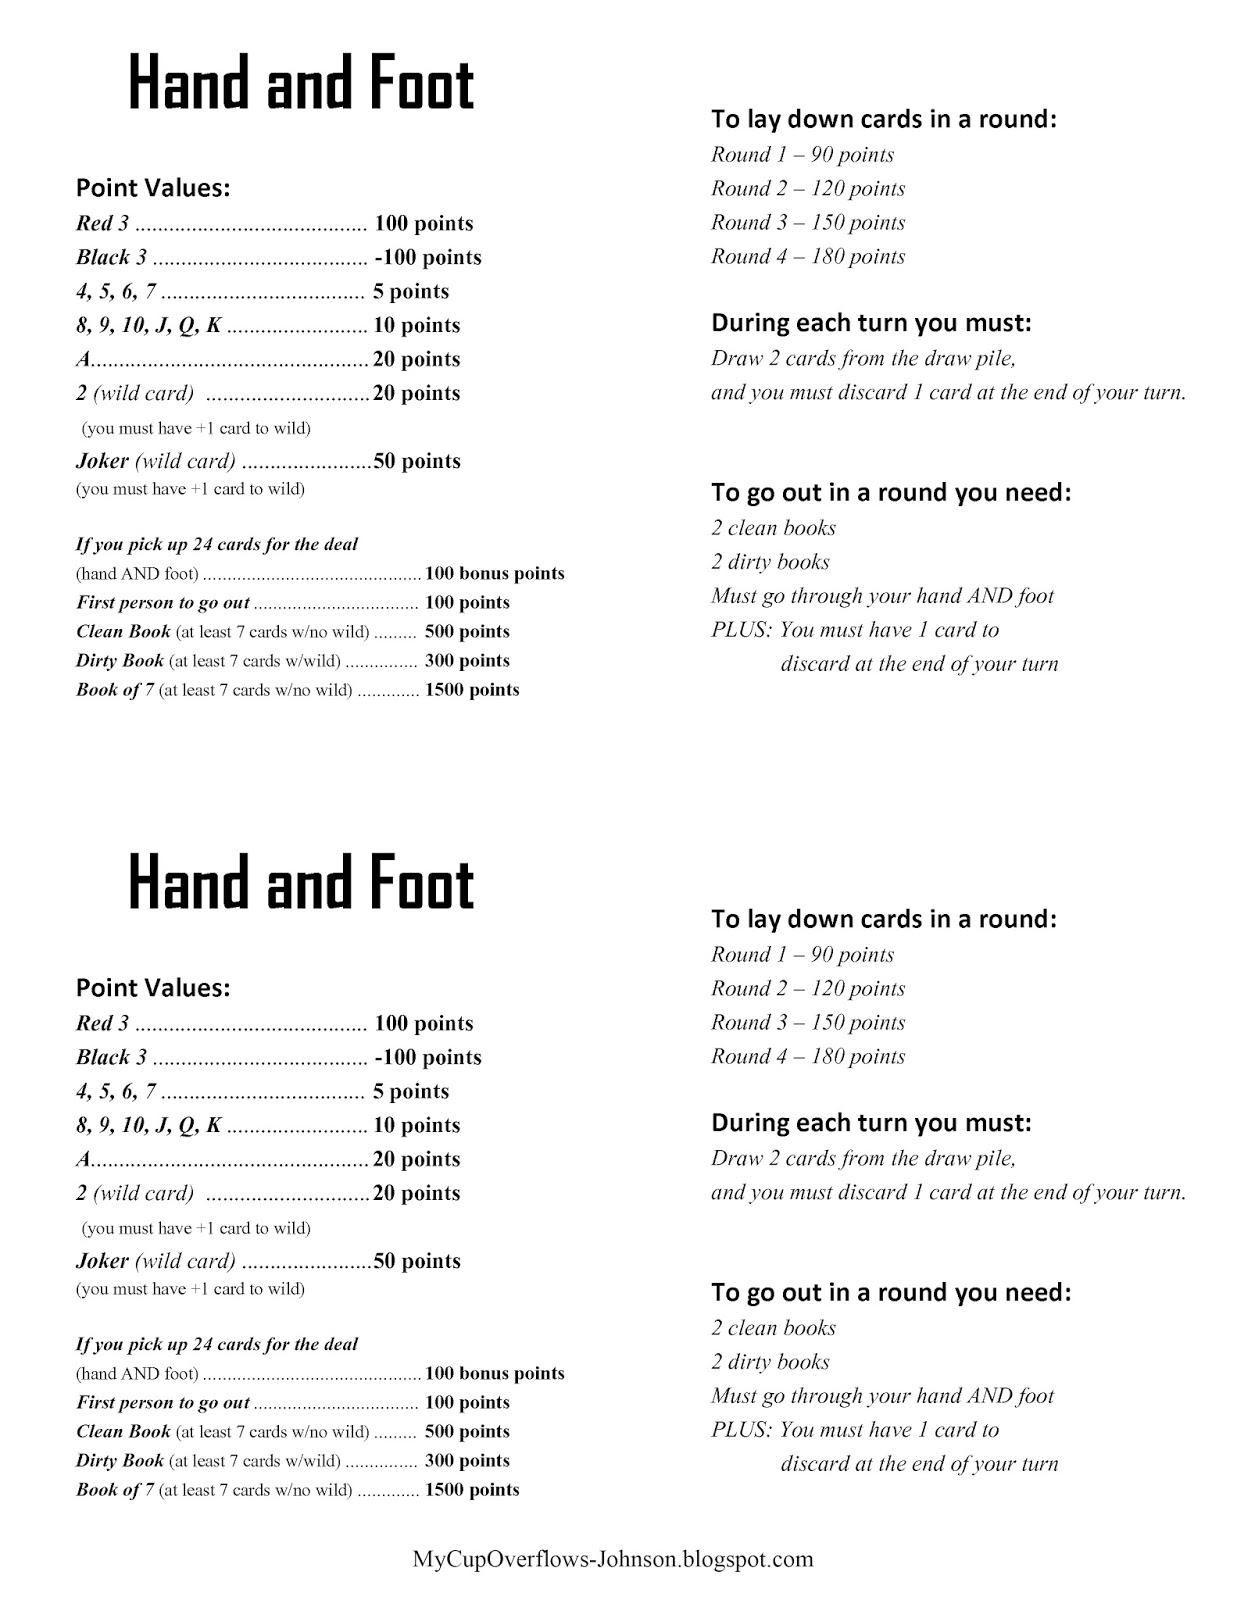 printable-hand-and-foot-rules